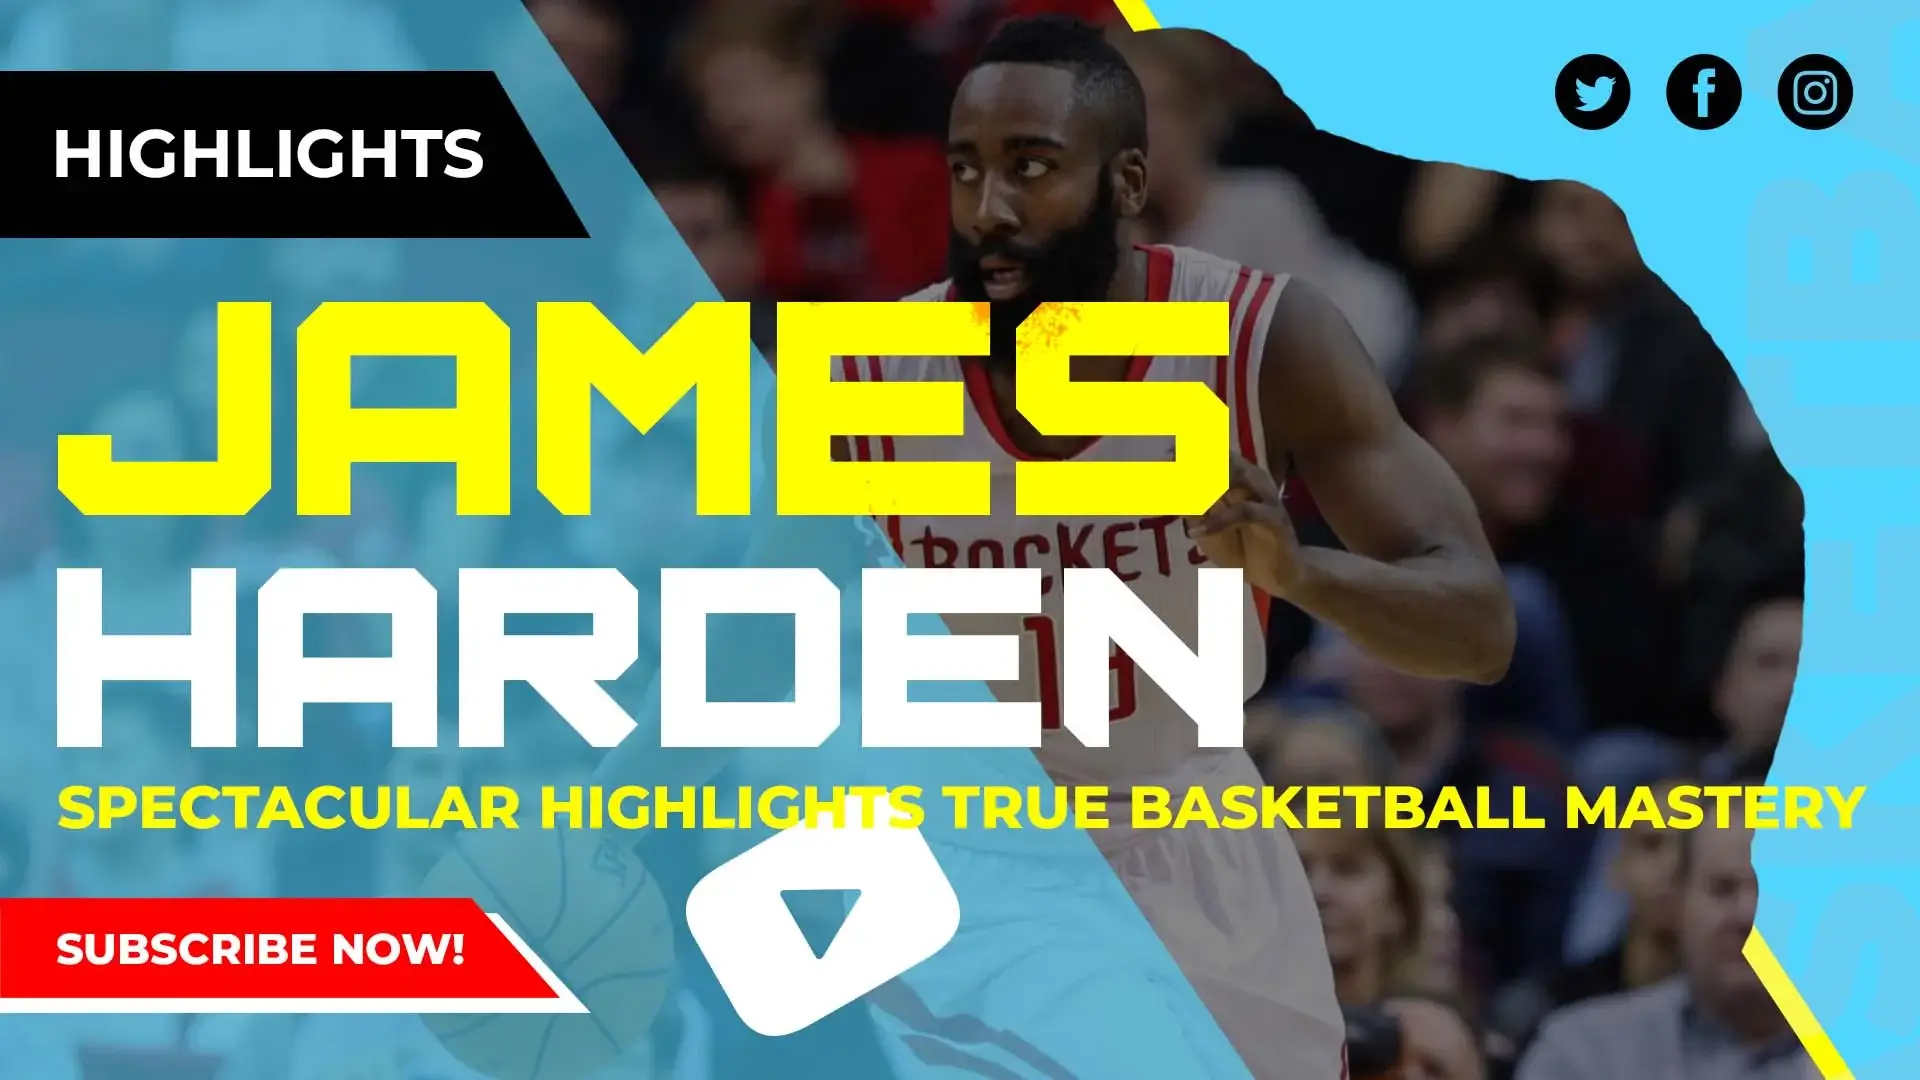 Dribble, Drive, Dominate: James Harden’s Spectacular Highlights Reveal True Basketball Mastery